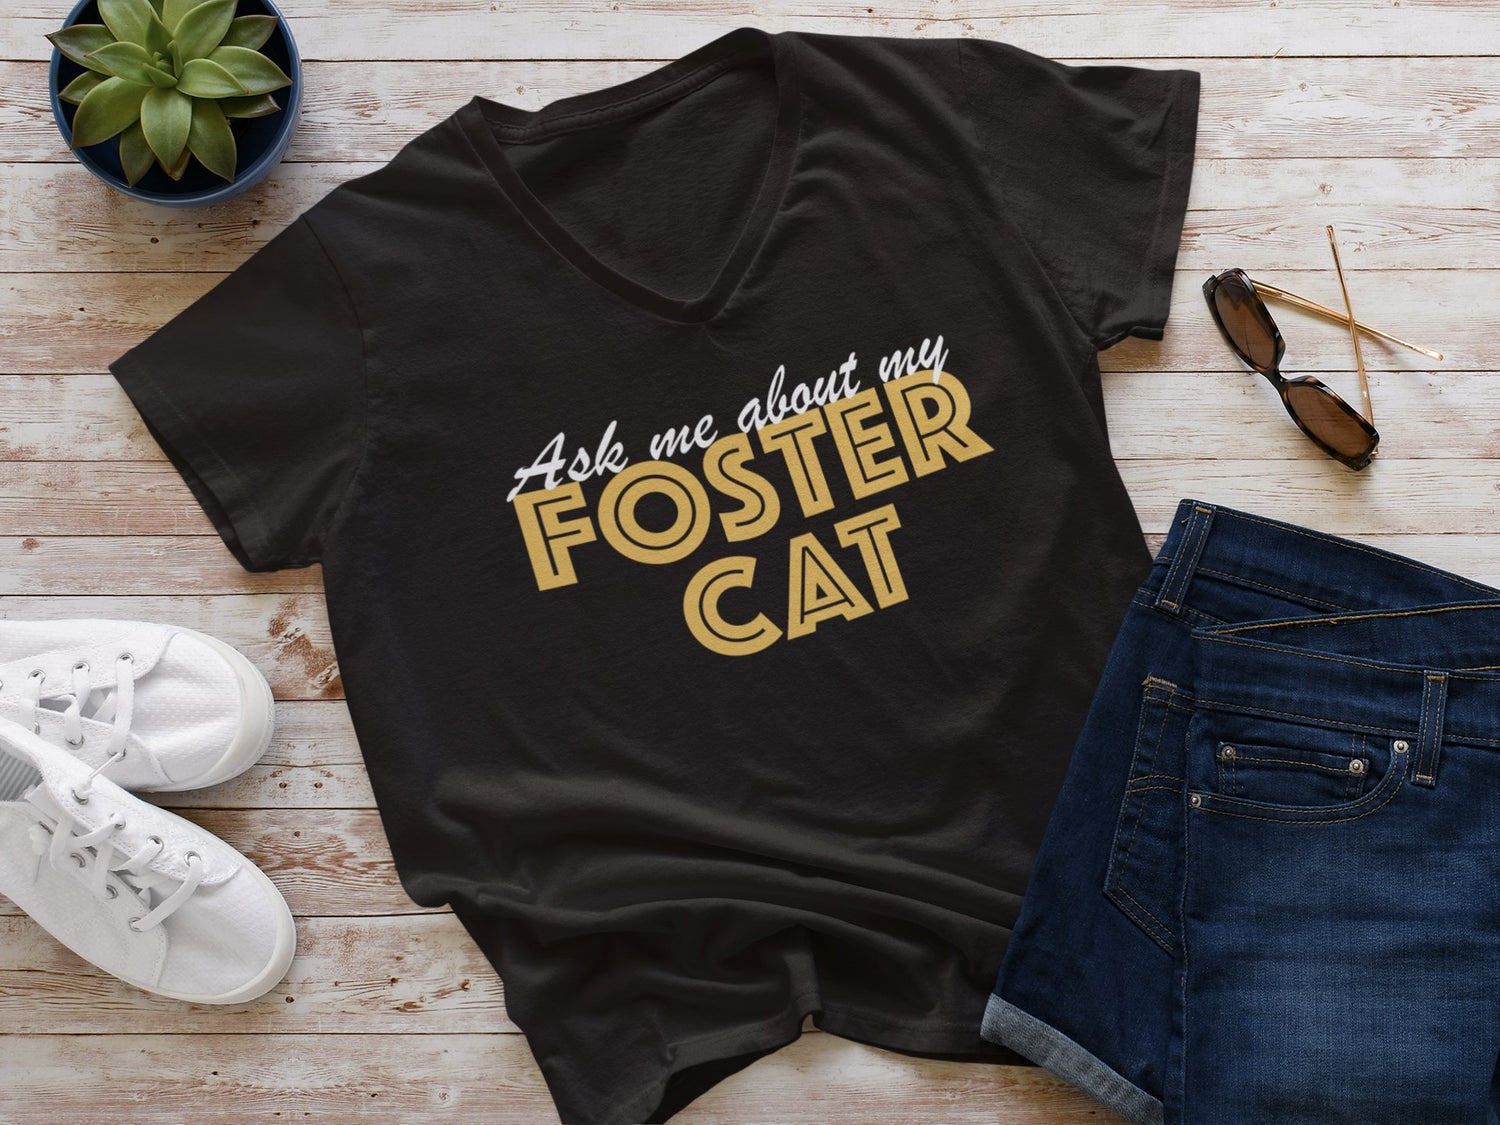 Ask Me About My Foster Cat - Detezi Designs